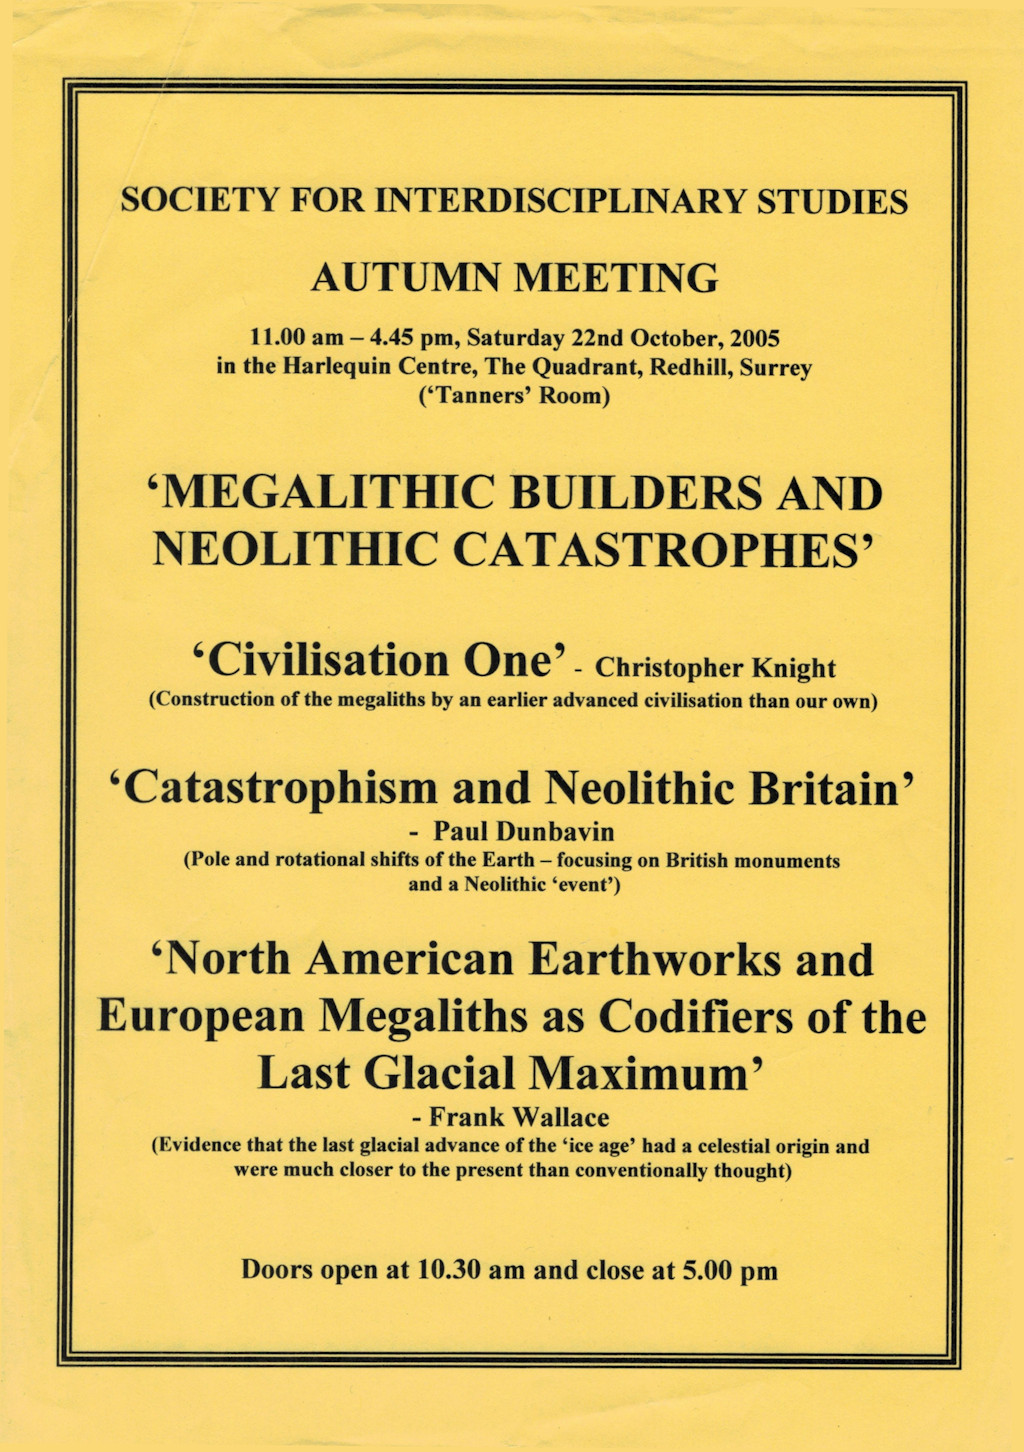 Megalithic builders meeting